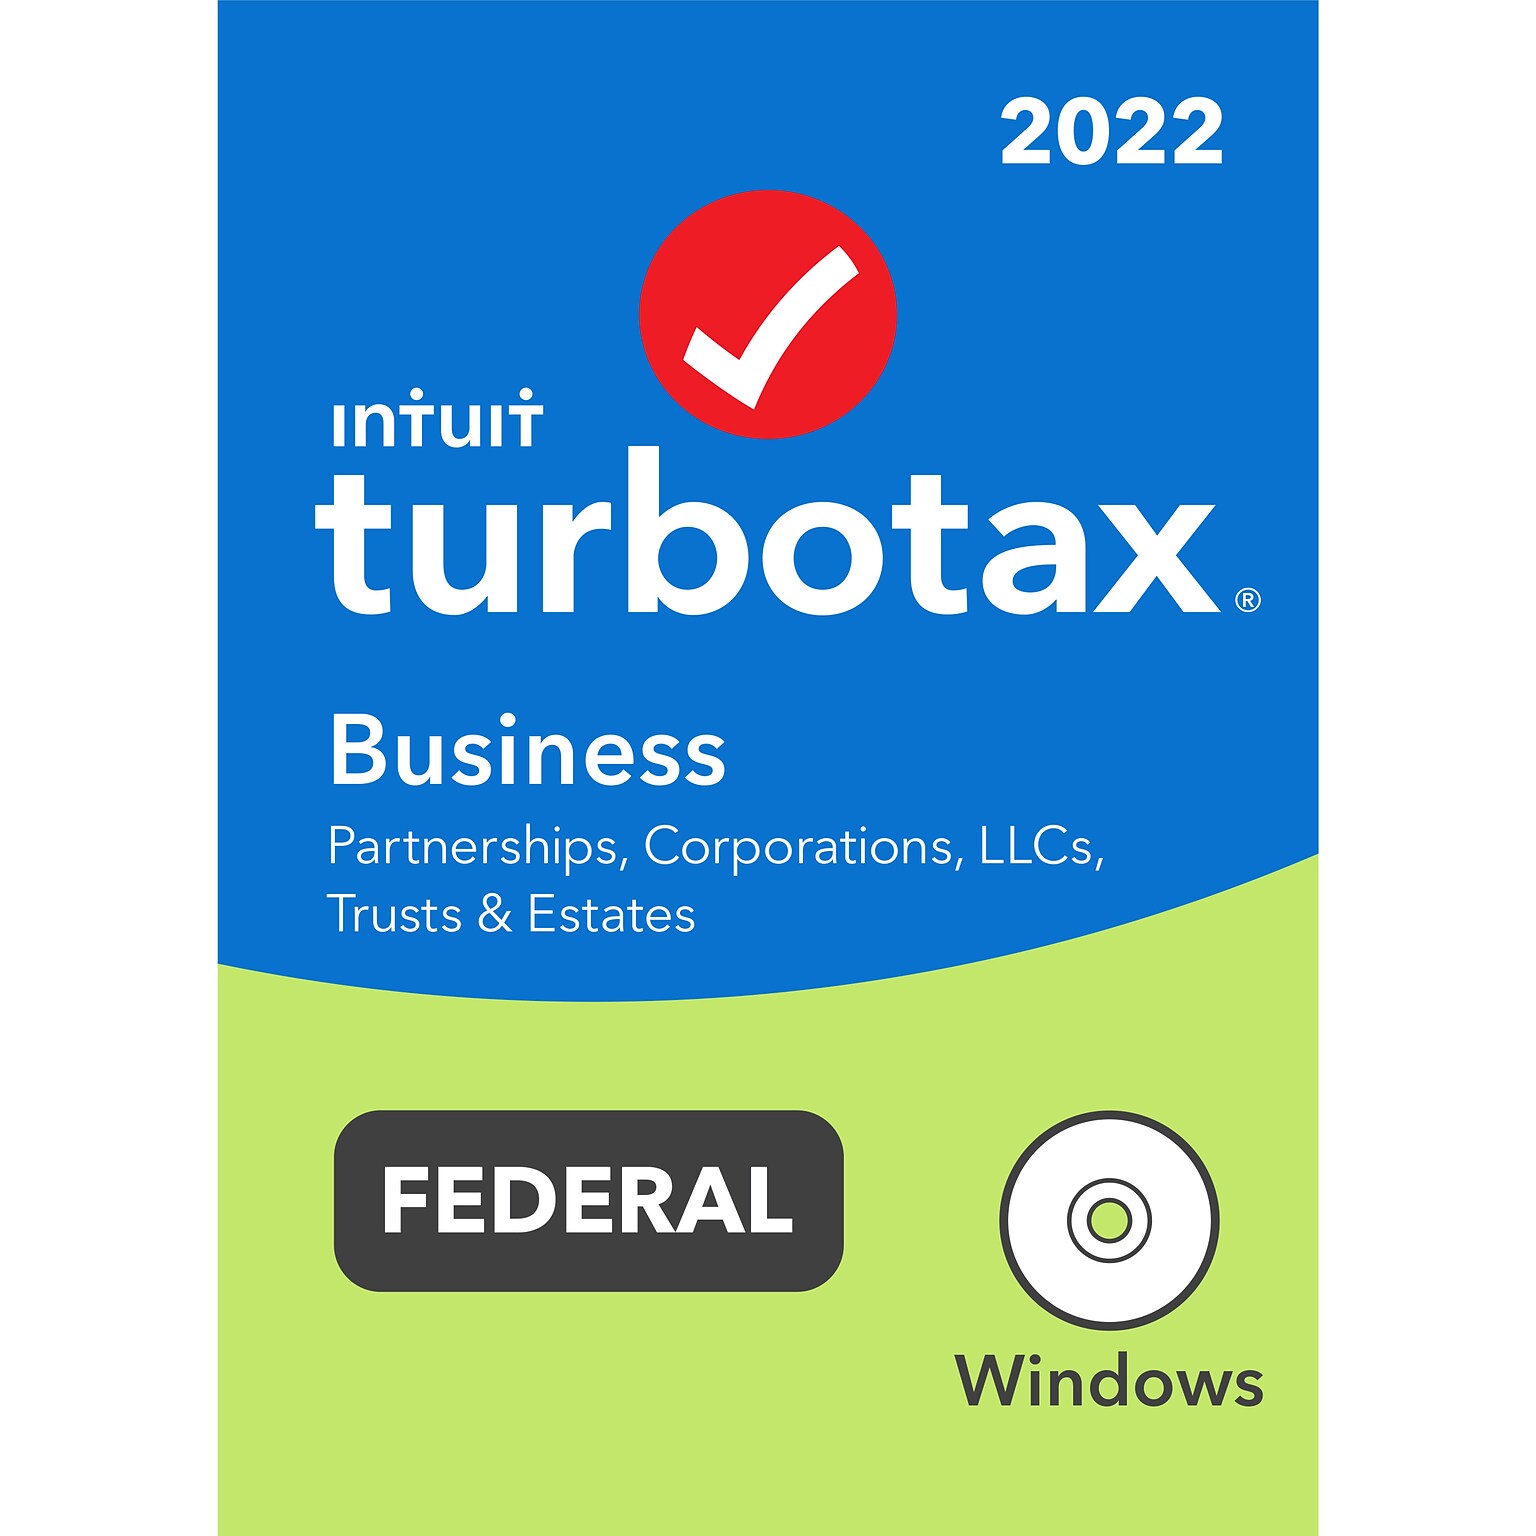 TurboTax Business 2022 Federal for 1 User, Windows, CD/DVD or Download (5101361)